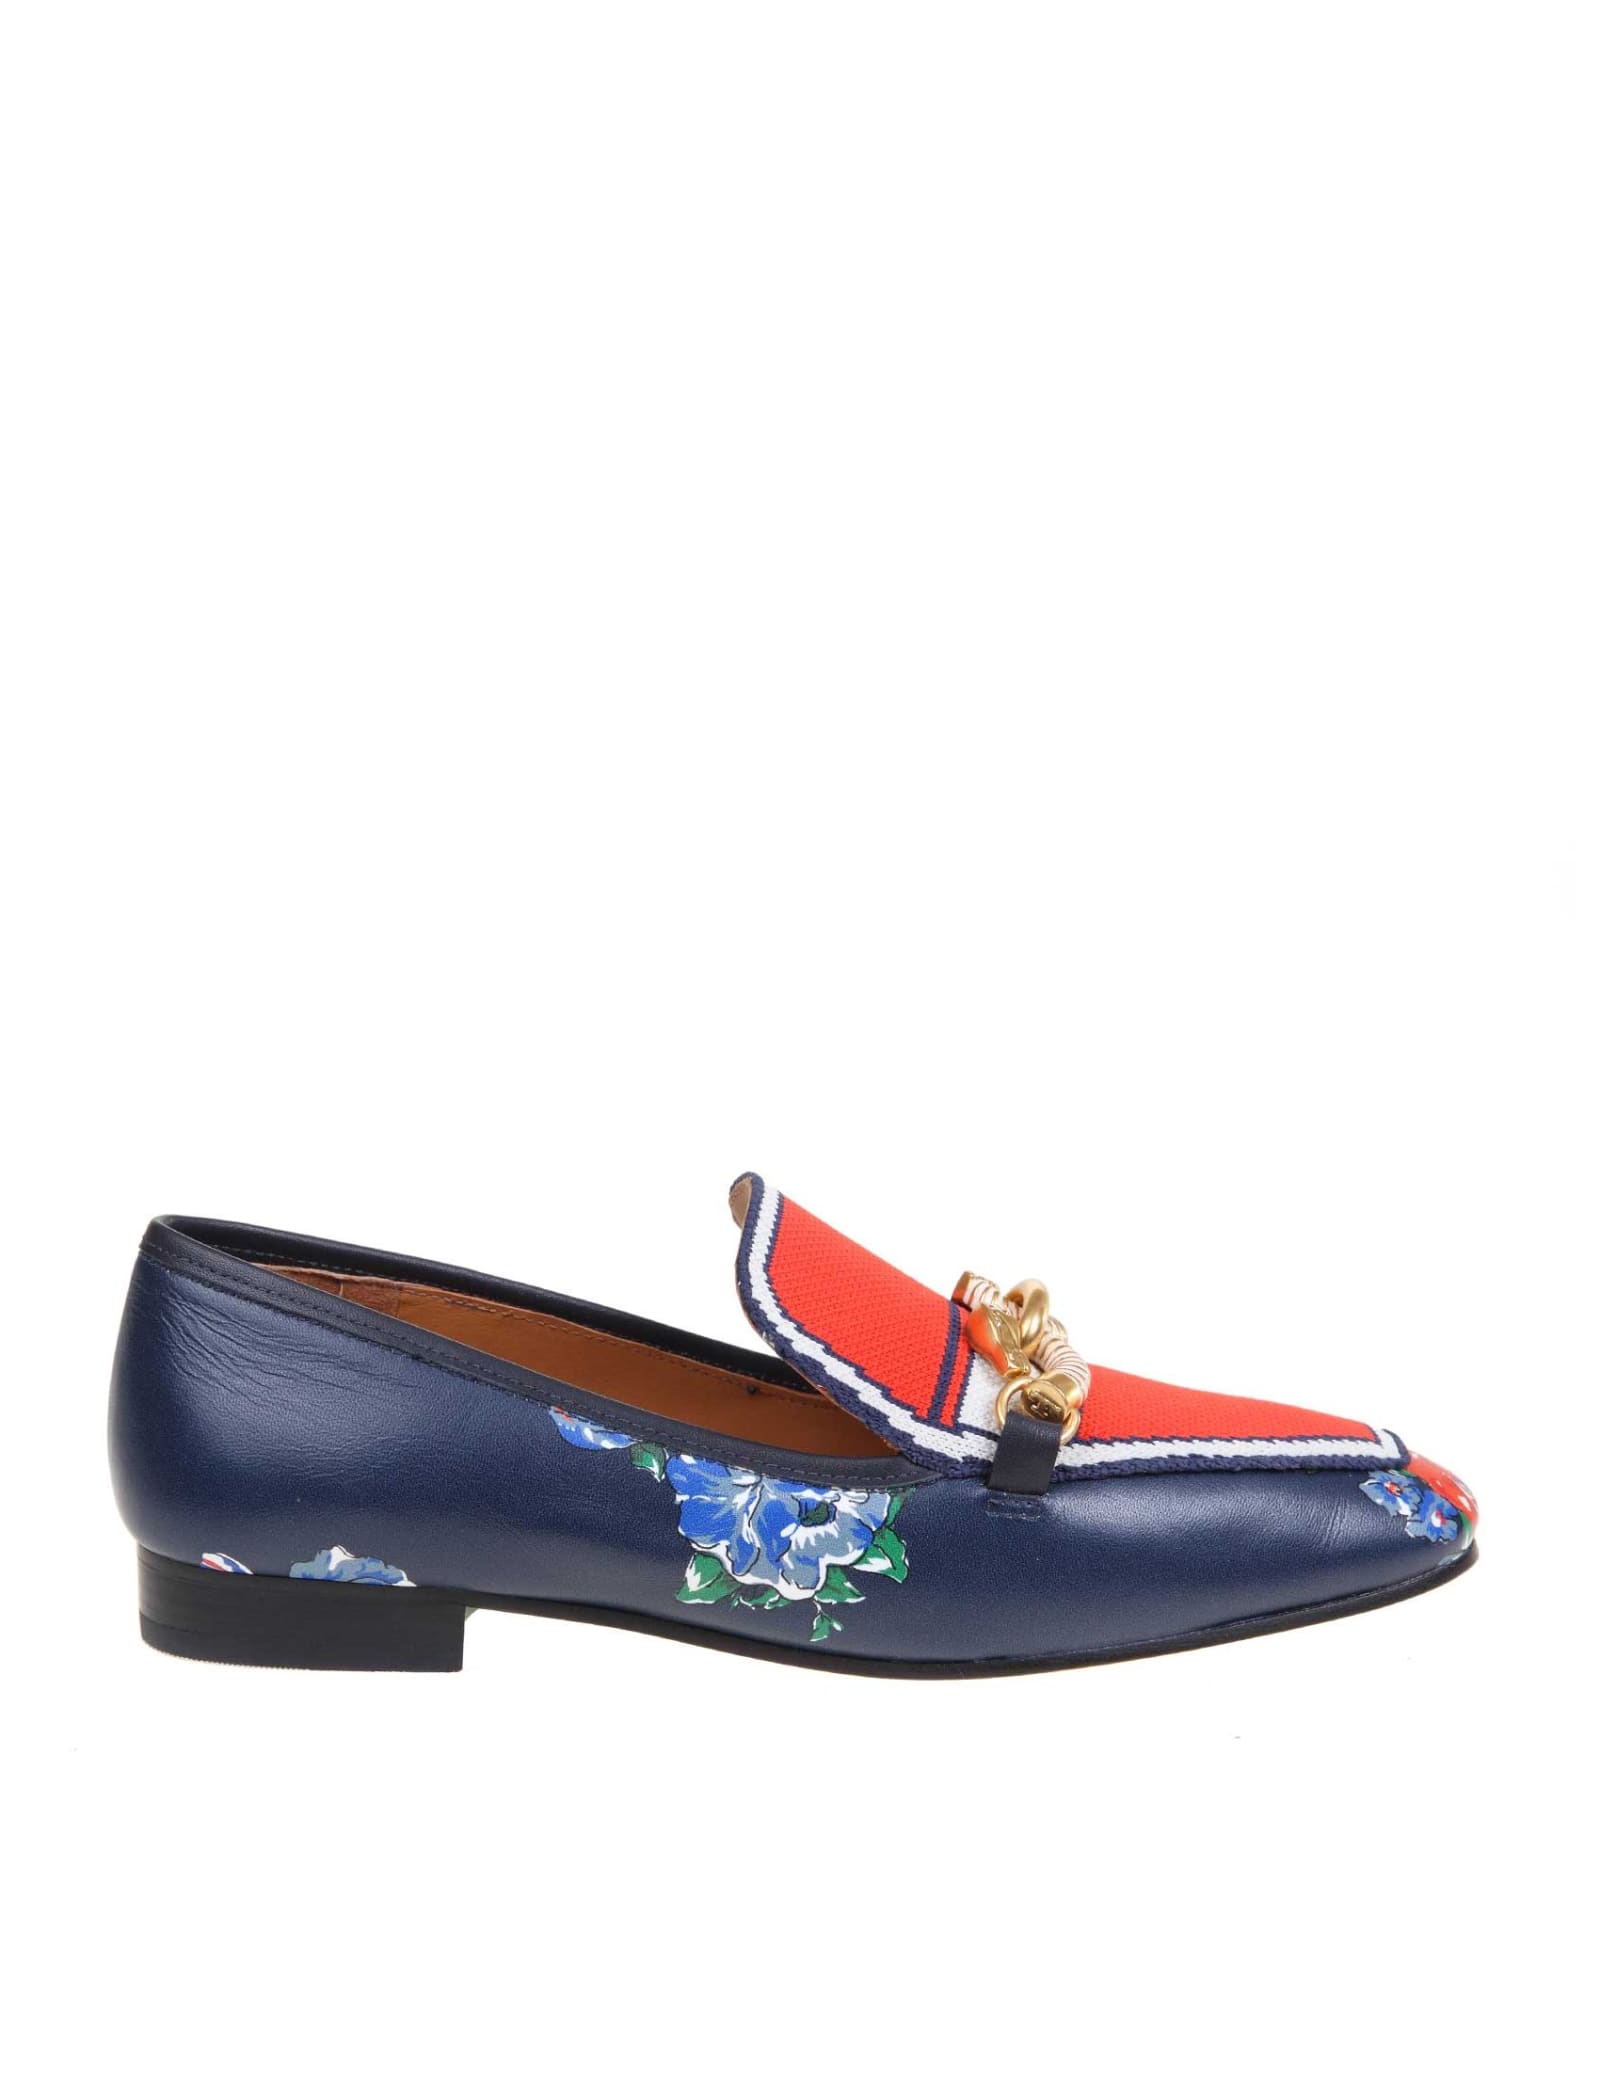 TORY BURCH JESSA MOCCASIN IN PRINTED LEATHER,11256847